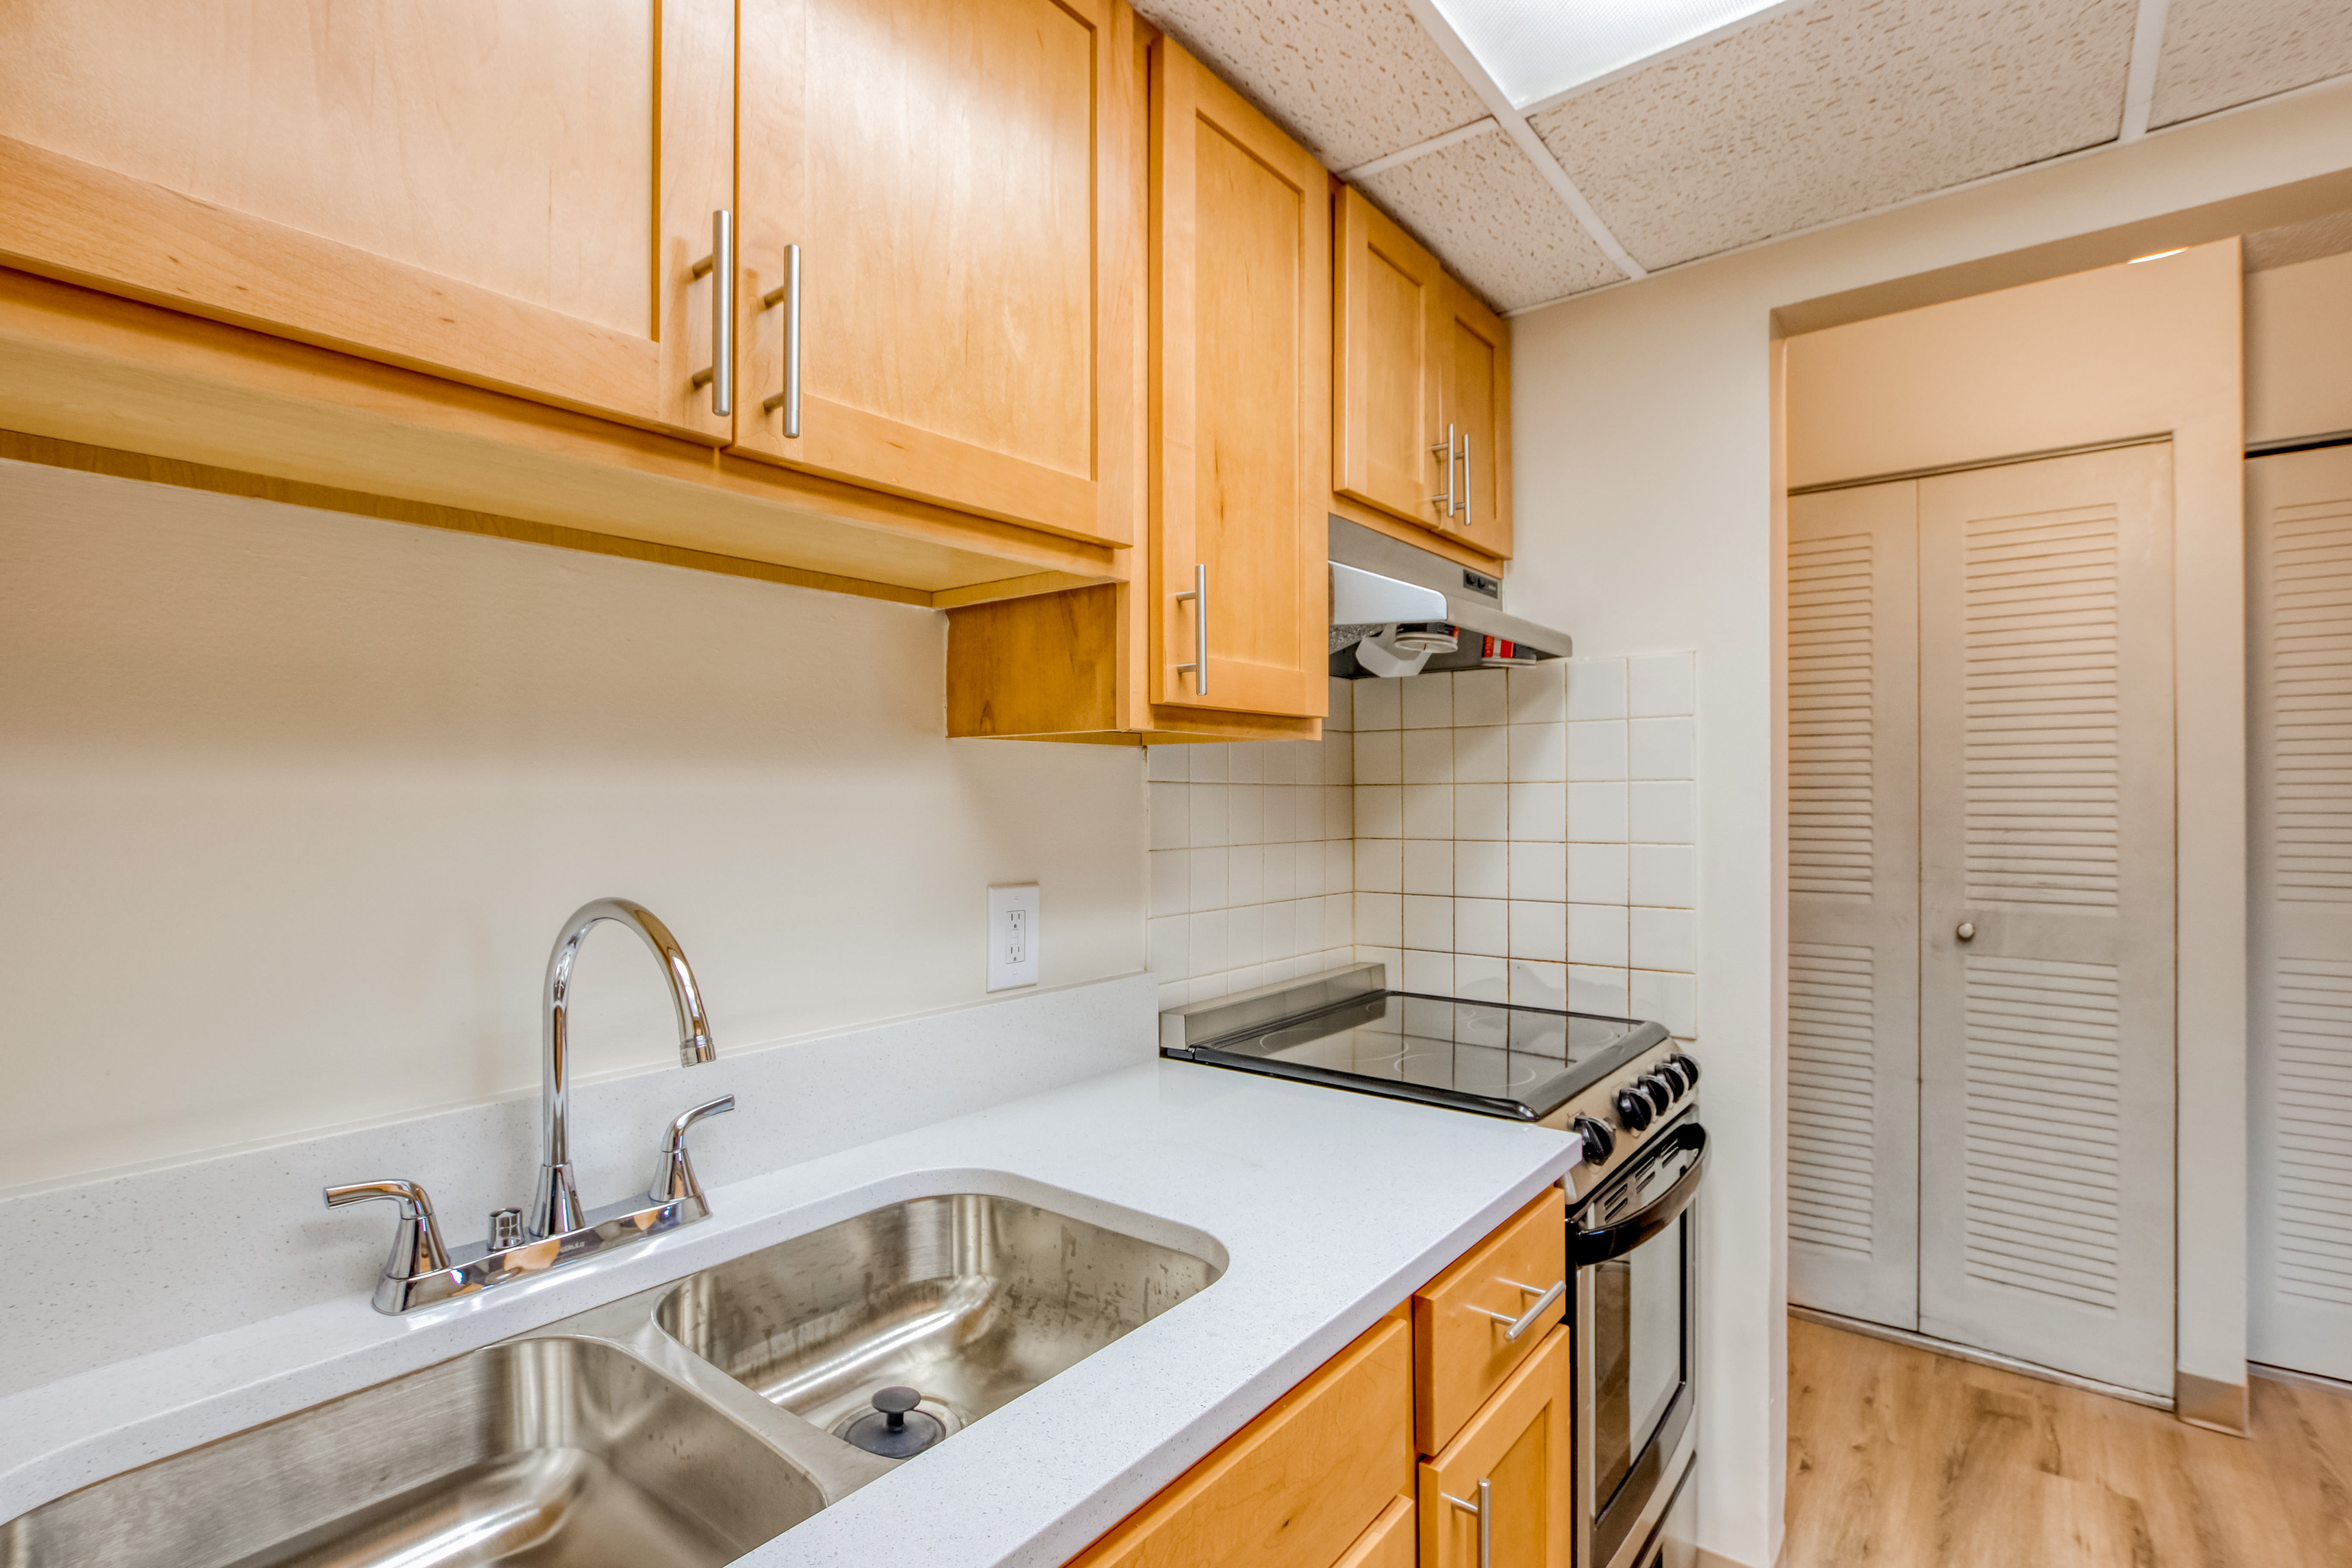 Fully equipped kitchen with garbage disposal at Bowin Place in Detroit, Michigan